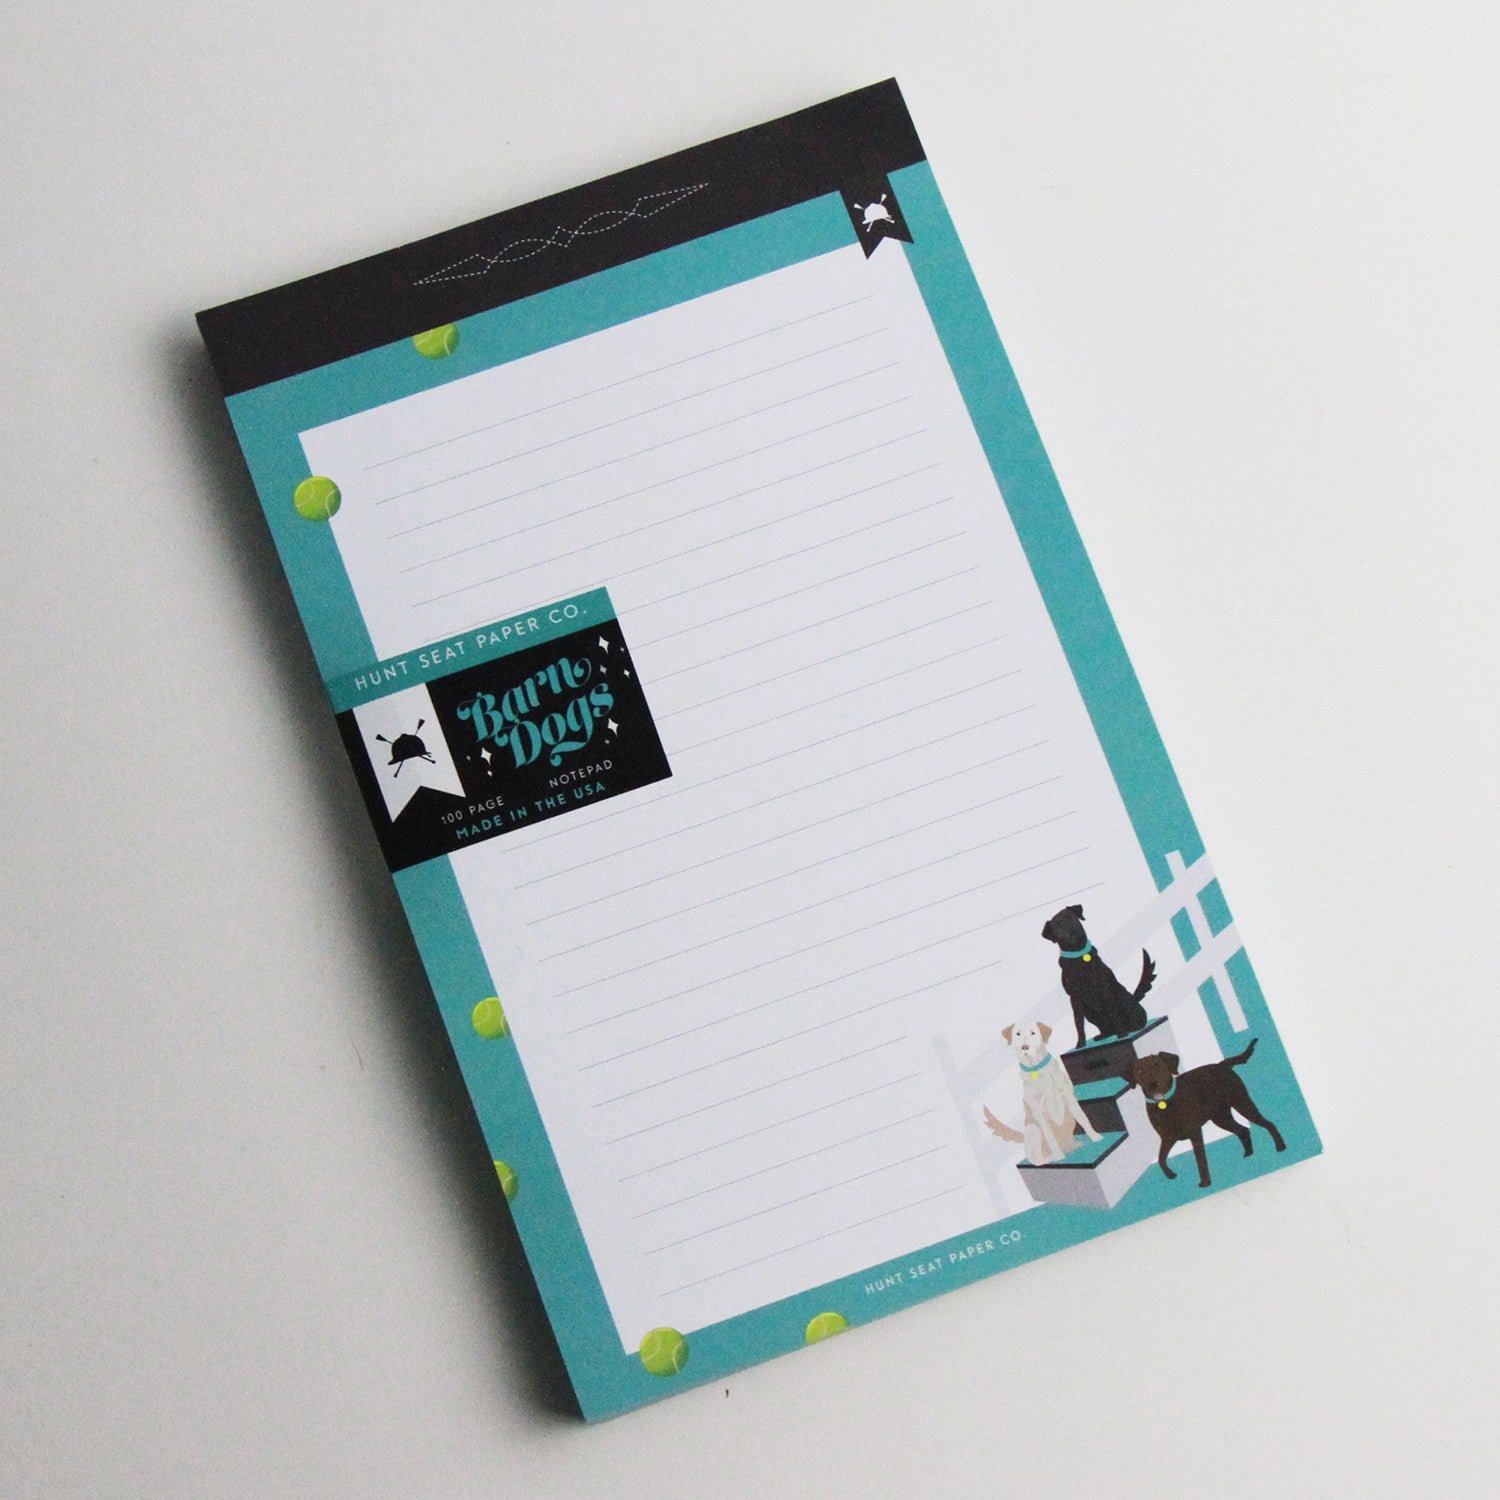 Hunt Seat Paper Co - Barn Dogs Notepad